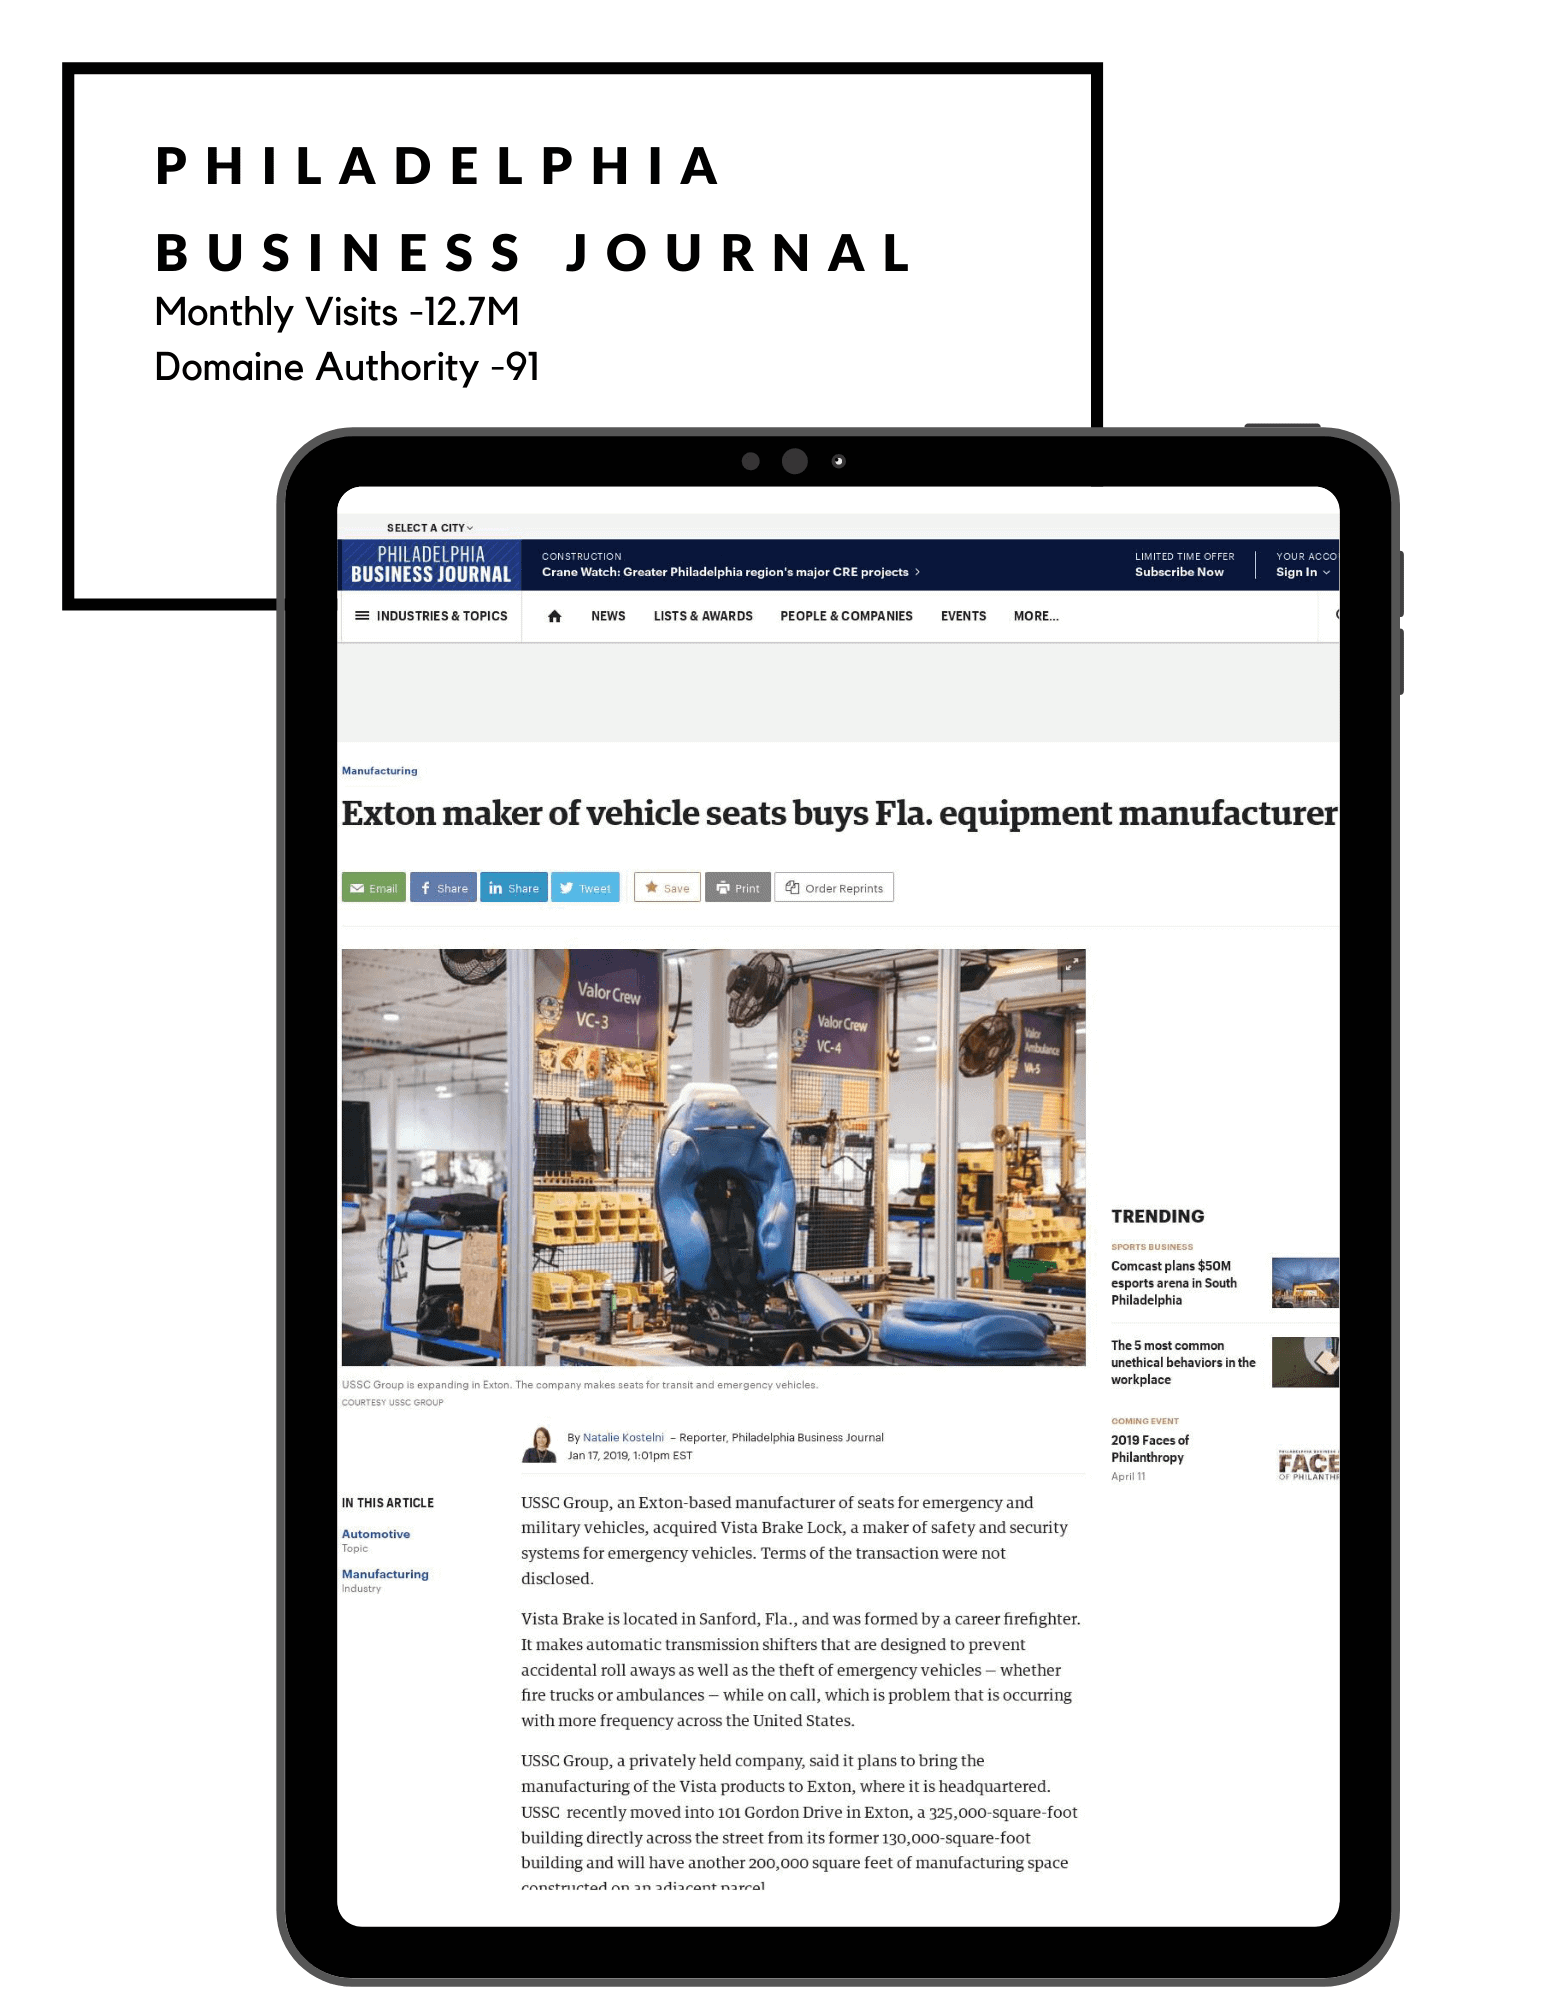 Philly Business Journal - USSC Media Results